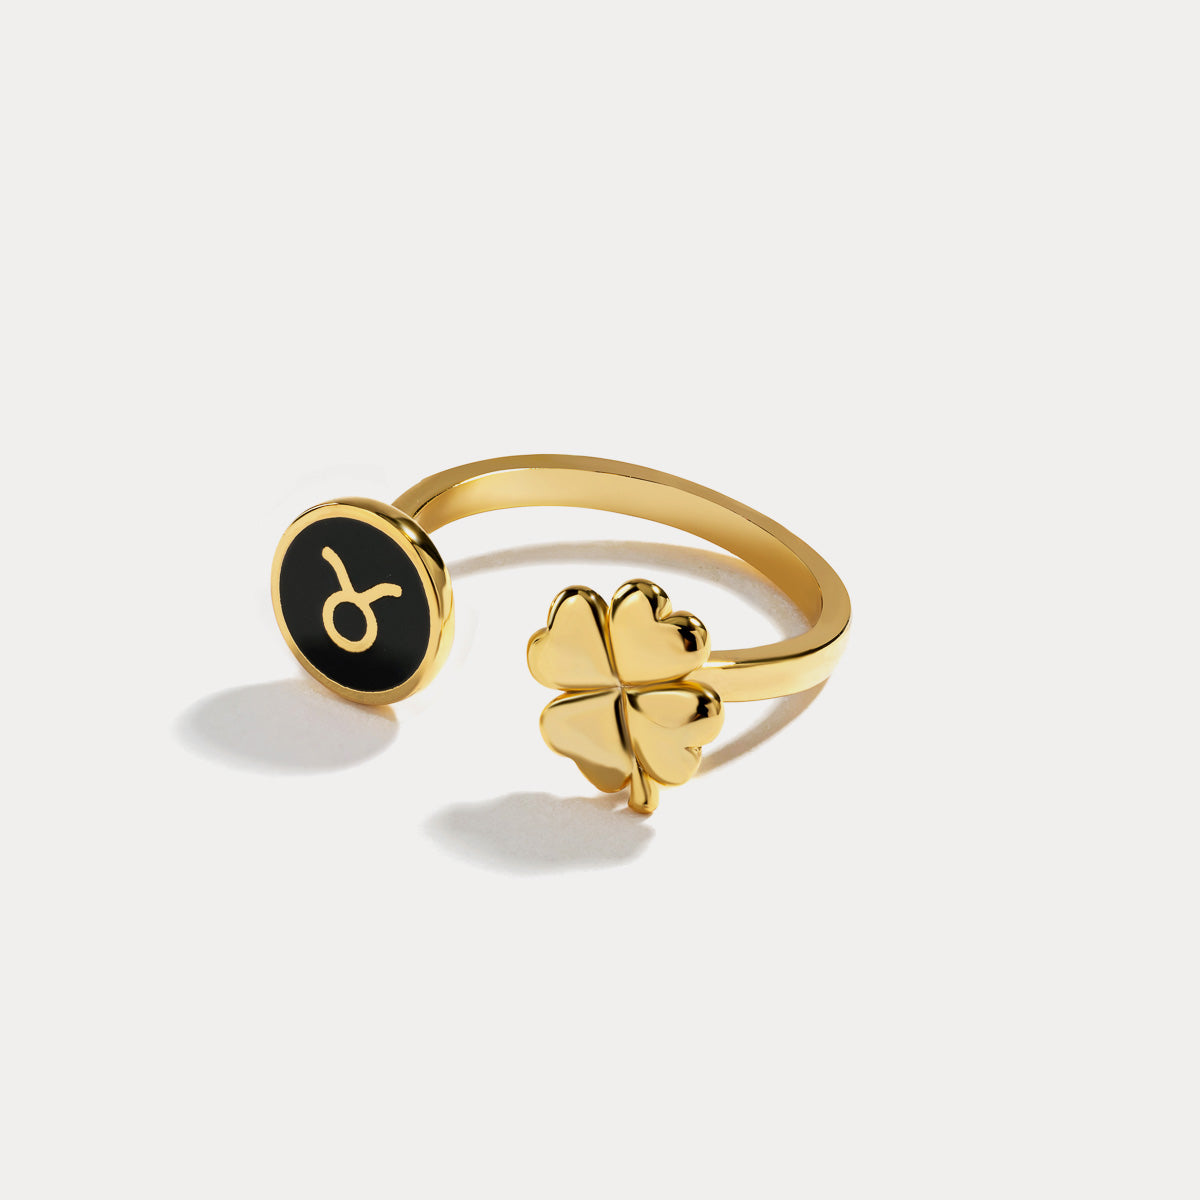 Taurus astrological sign ring